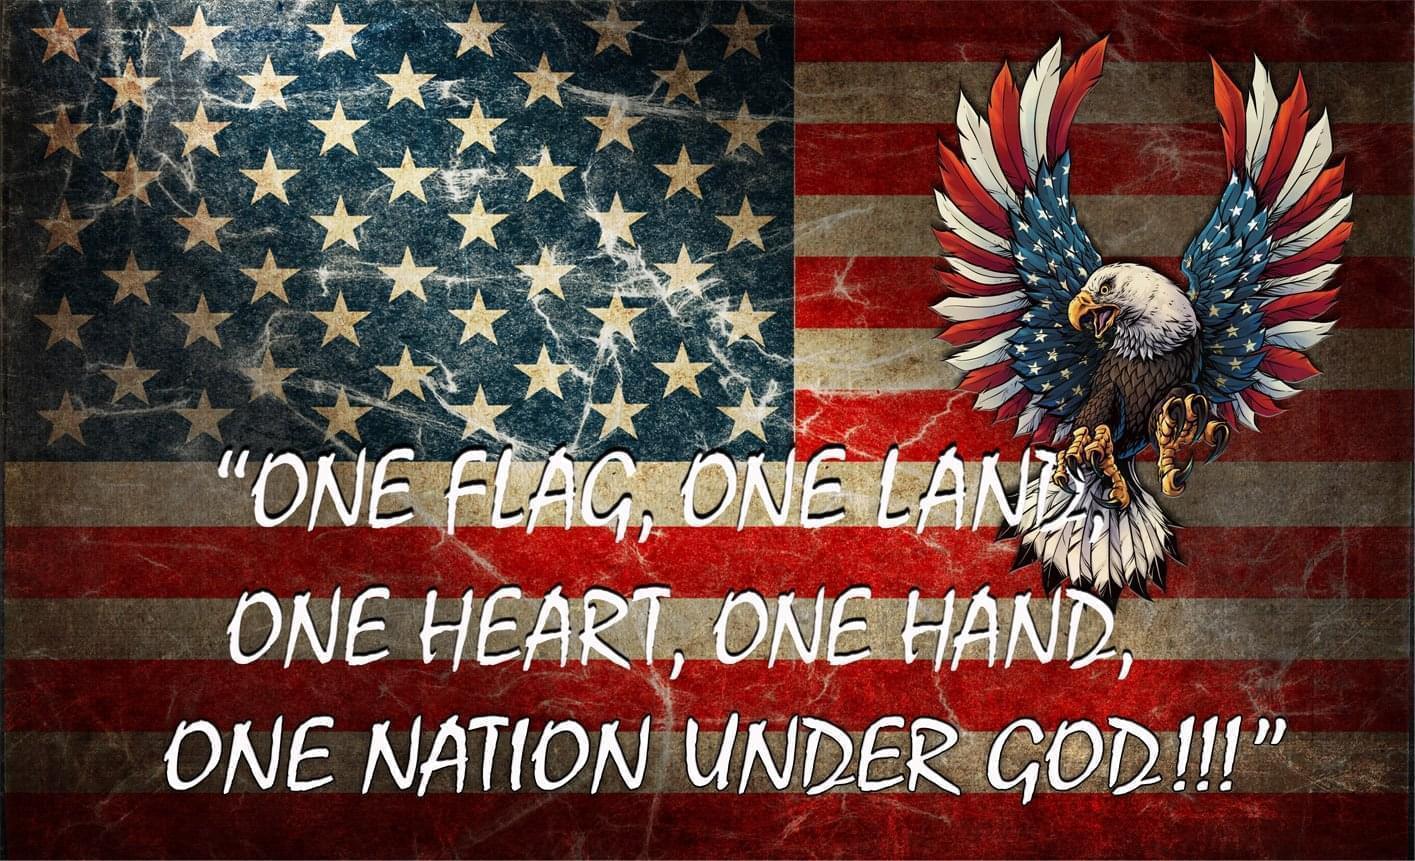 American Flag One Flag, One Land, One Heart, One Hand, One nation under God Decal